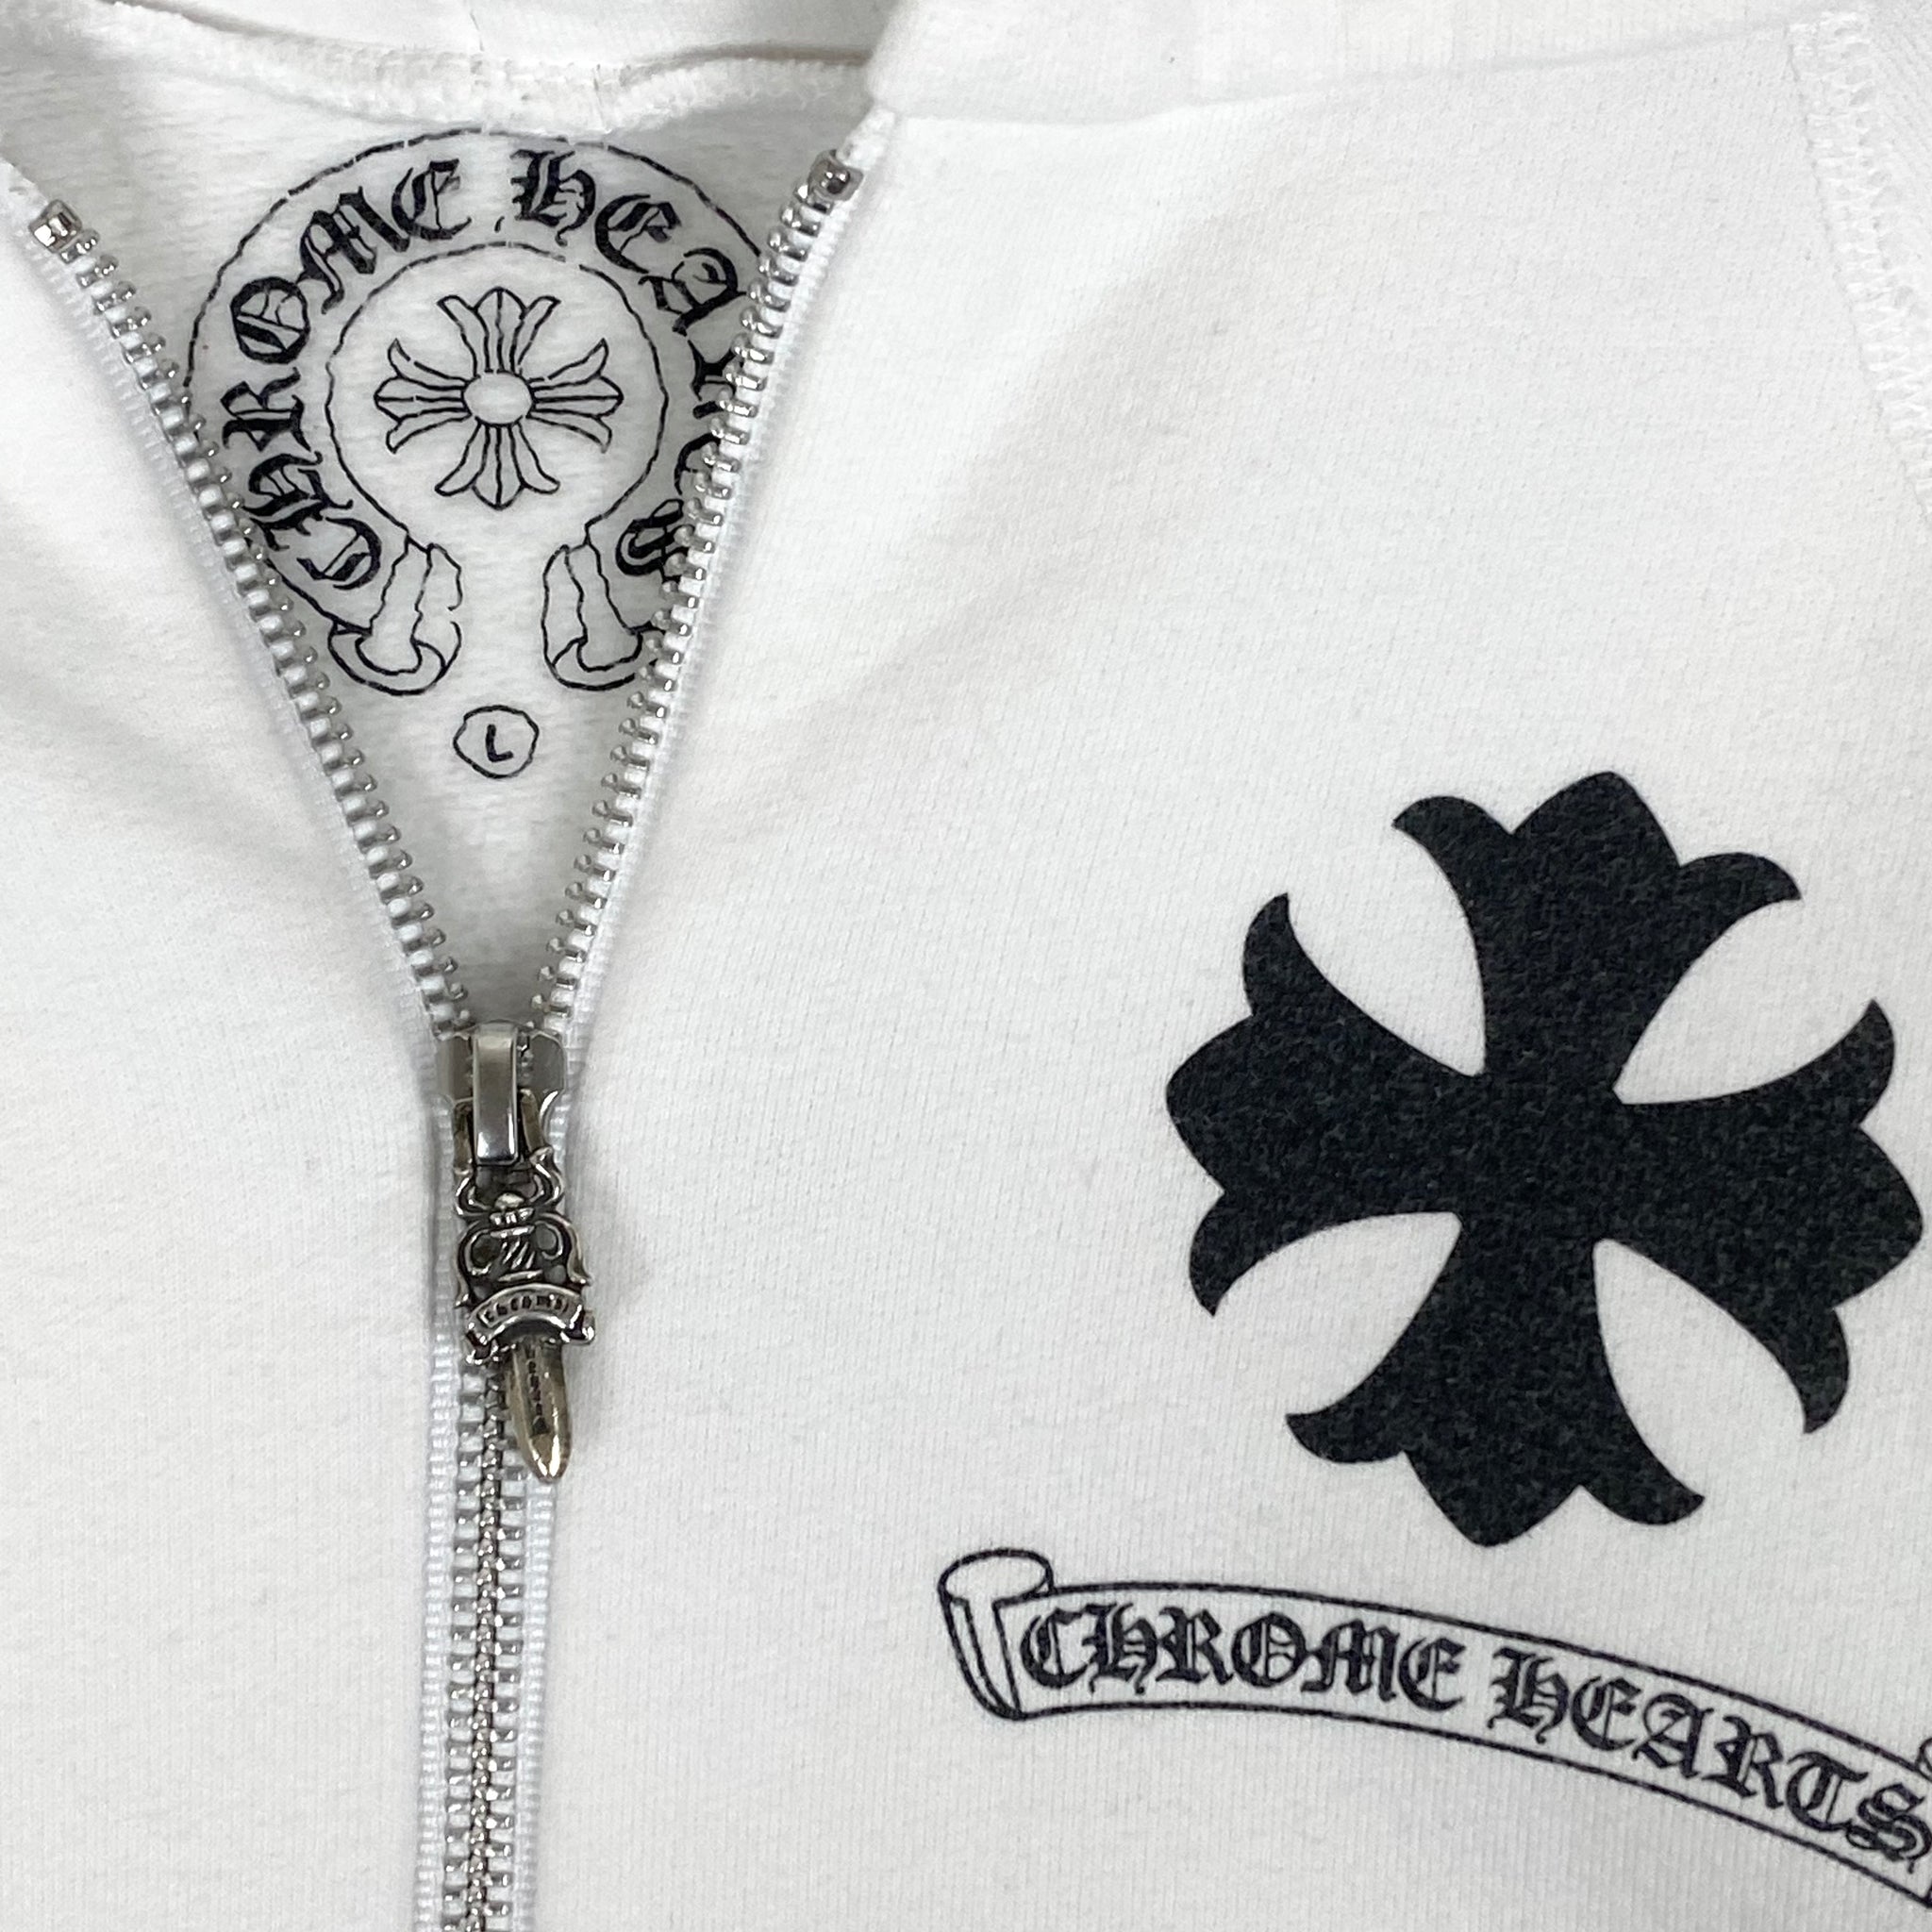 chrome hearts dagger zip up spiral crosses hoodie – change clothes